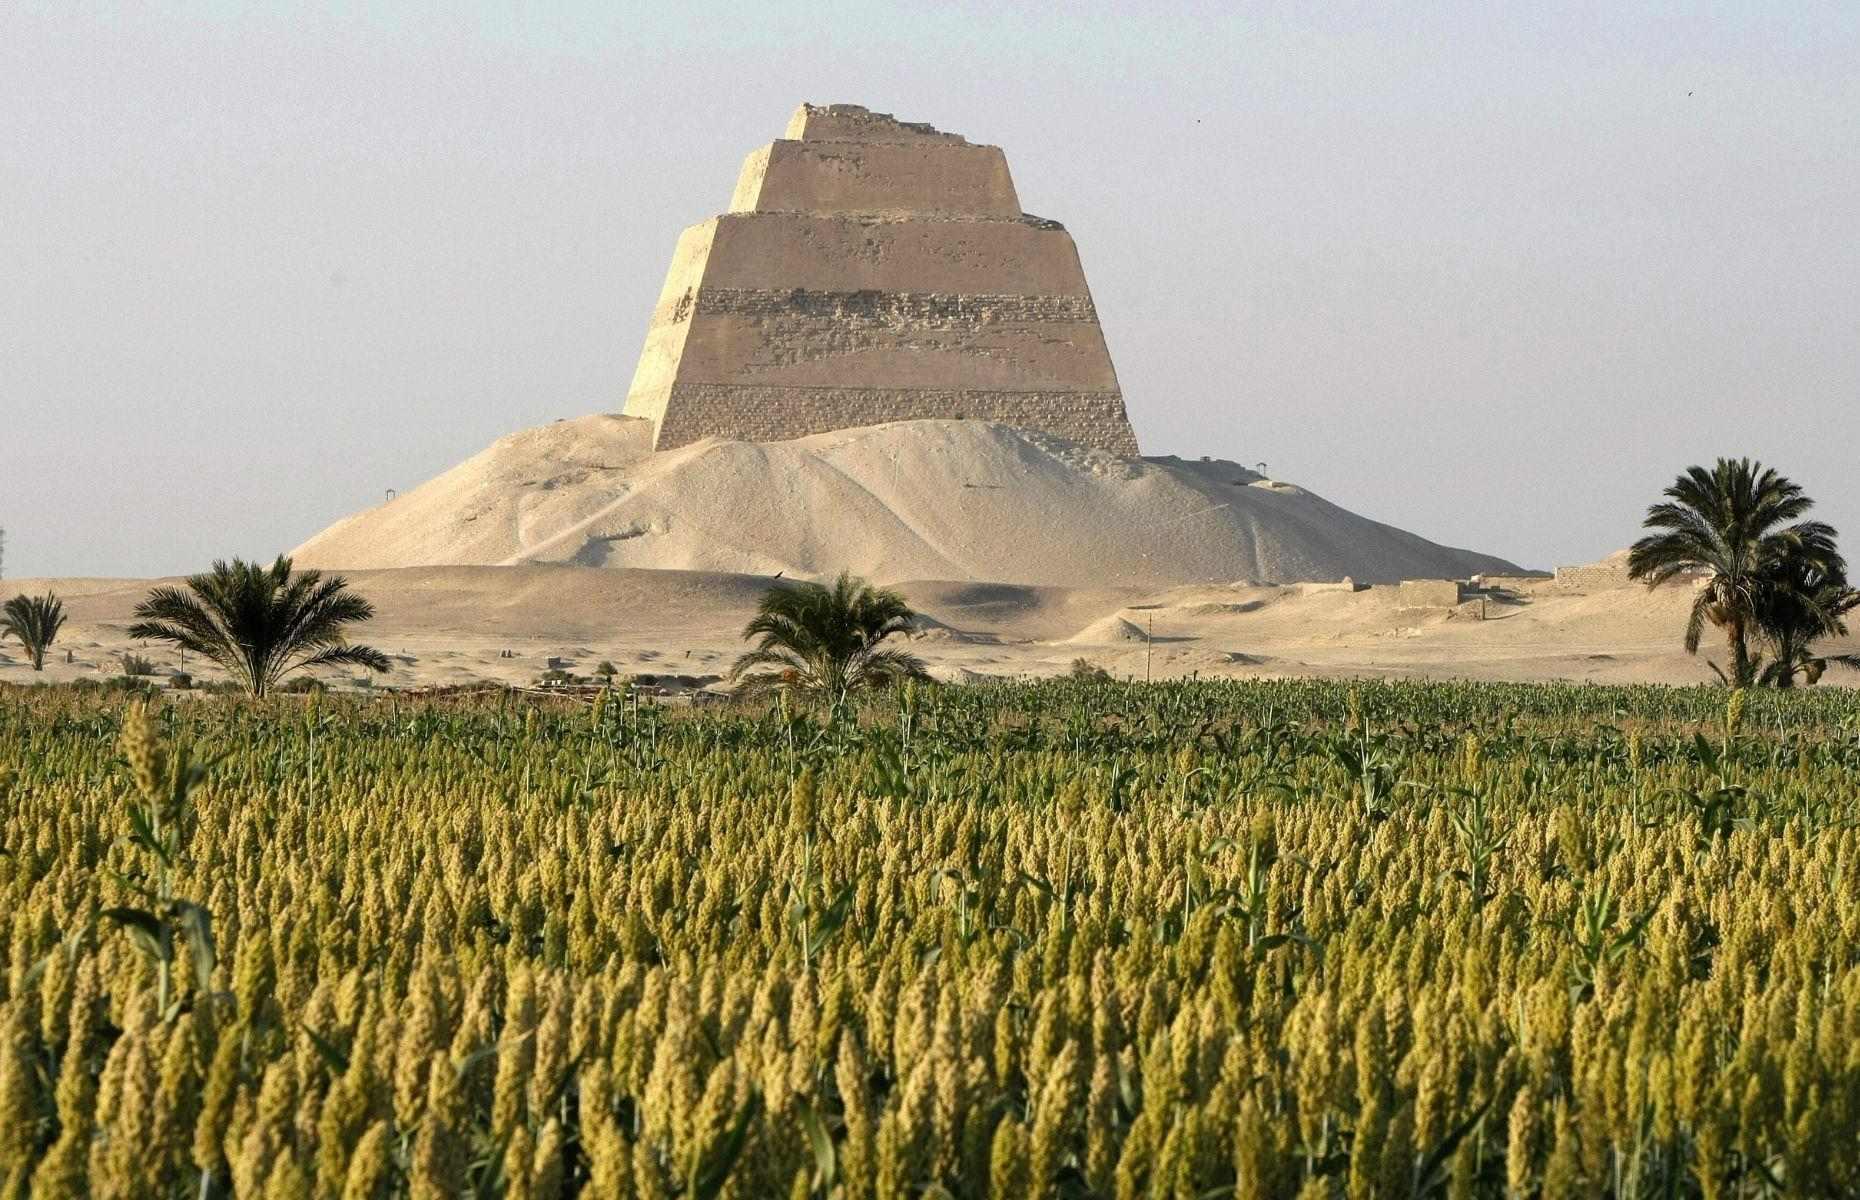 <p>Located roughly 62 miles (99km) from Cairo, Meidum Pyramid sits in an archaeological site that was built during the reign of King Sneferu, the first pharaoh of the Fourth Dynasty (2613 to 2589 BC). Meidum Pyramid was Egypt’s first straight-sided pyramid – affectionately resembling a sandcastle – and explains why it’s often described as a ‘false pyramid’. Numerous construction issues halted the completion of the pyramid, and with this in mind its appearance is noticeably different from other Egyptian pyramids. </p>